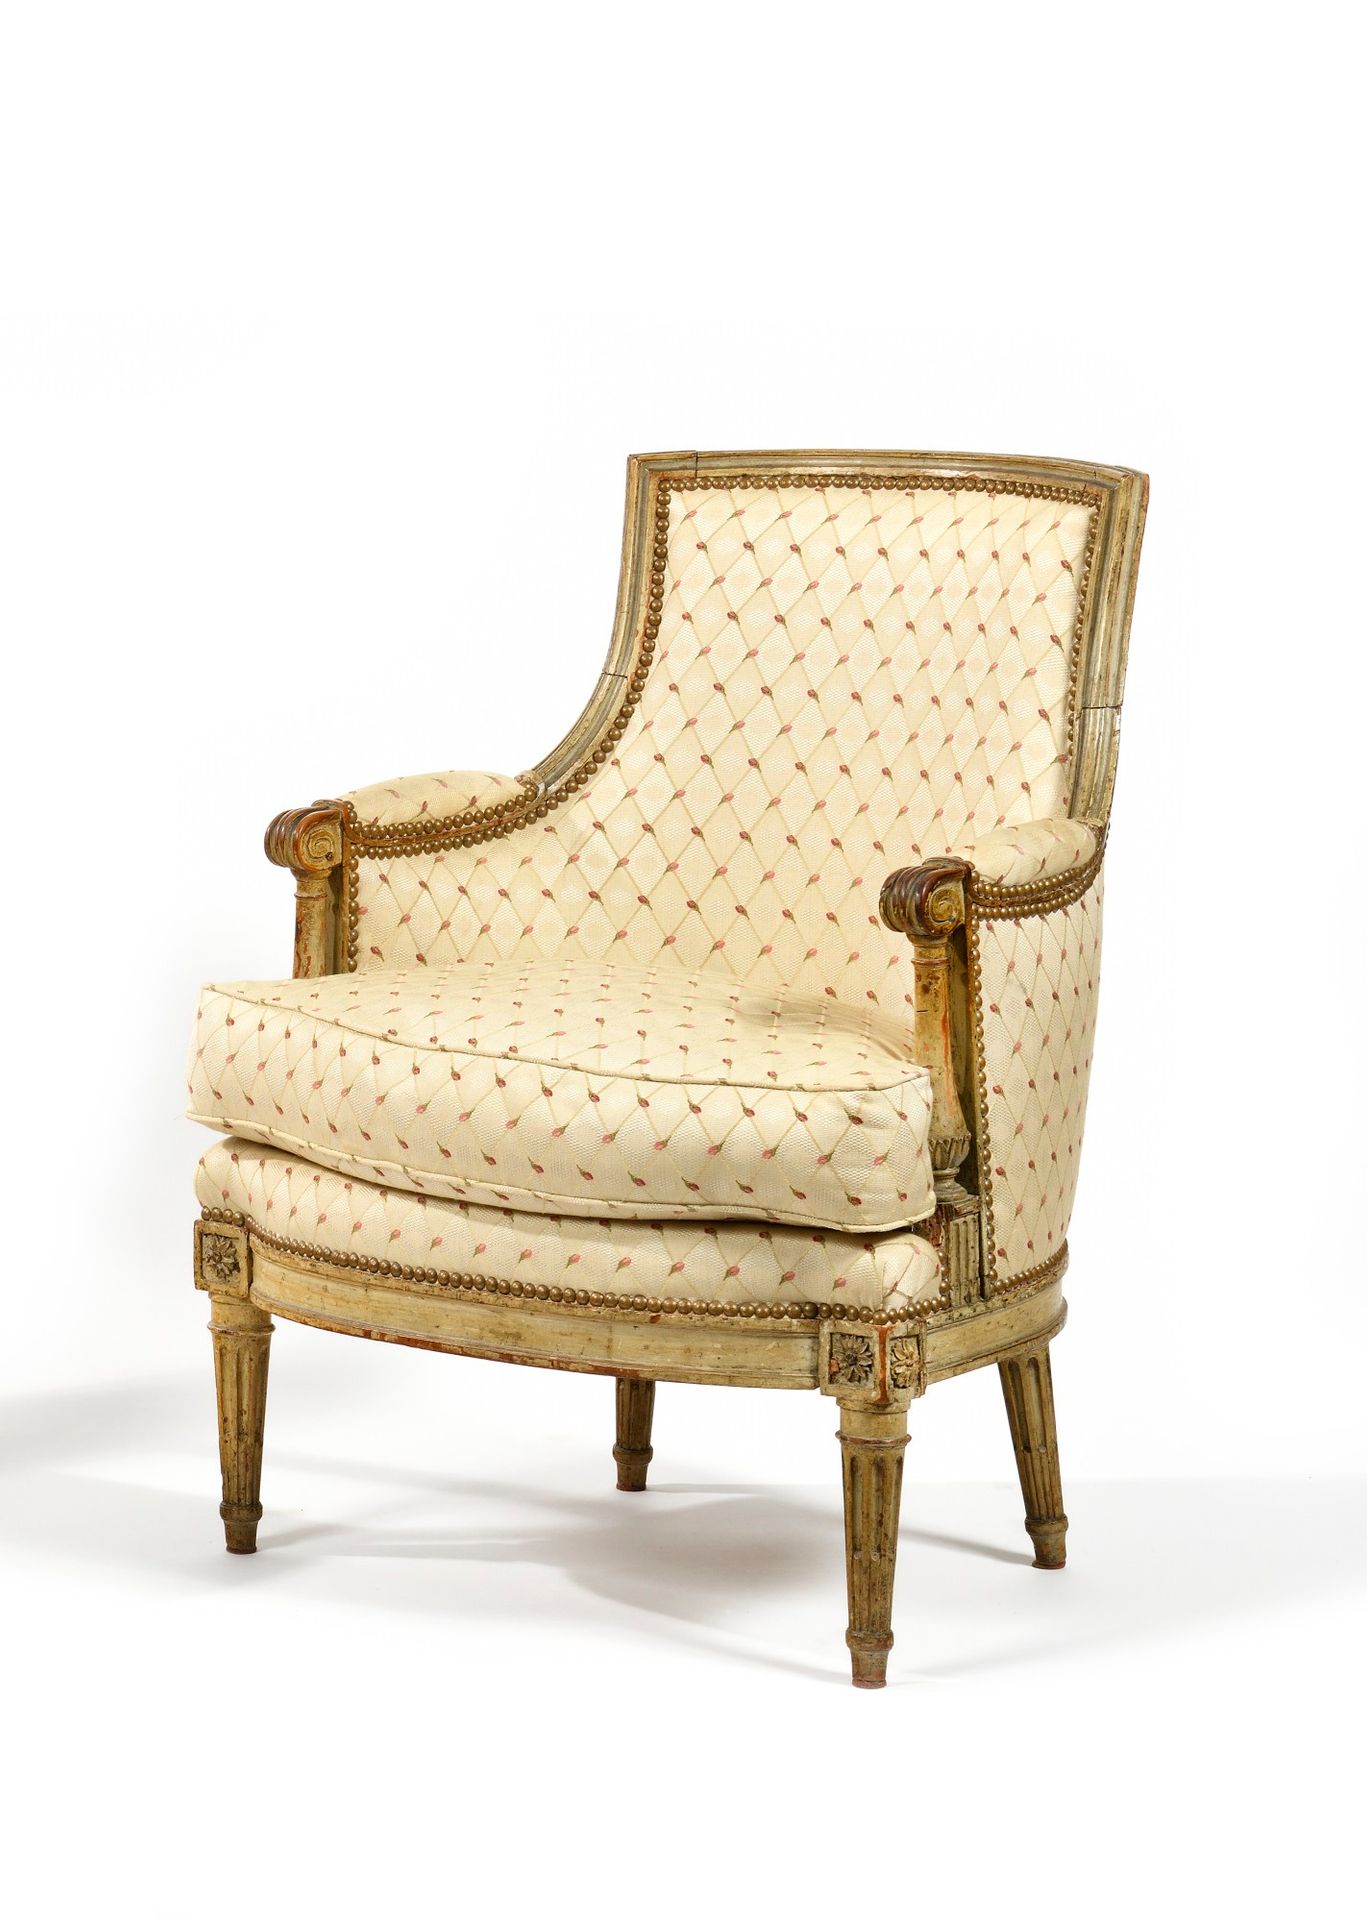 Null Nicolas-Louis DELAISEMENT, received Master in 1776
SMALL SHEPHERD'S CHAIR
I&hellip;